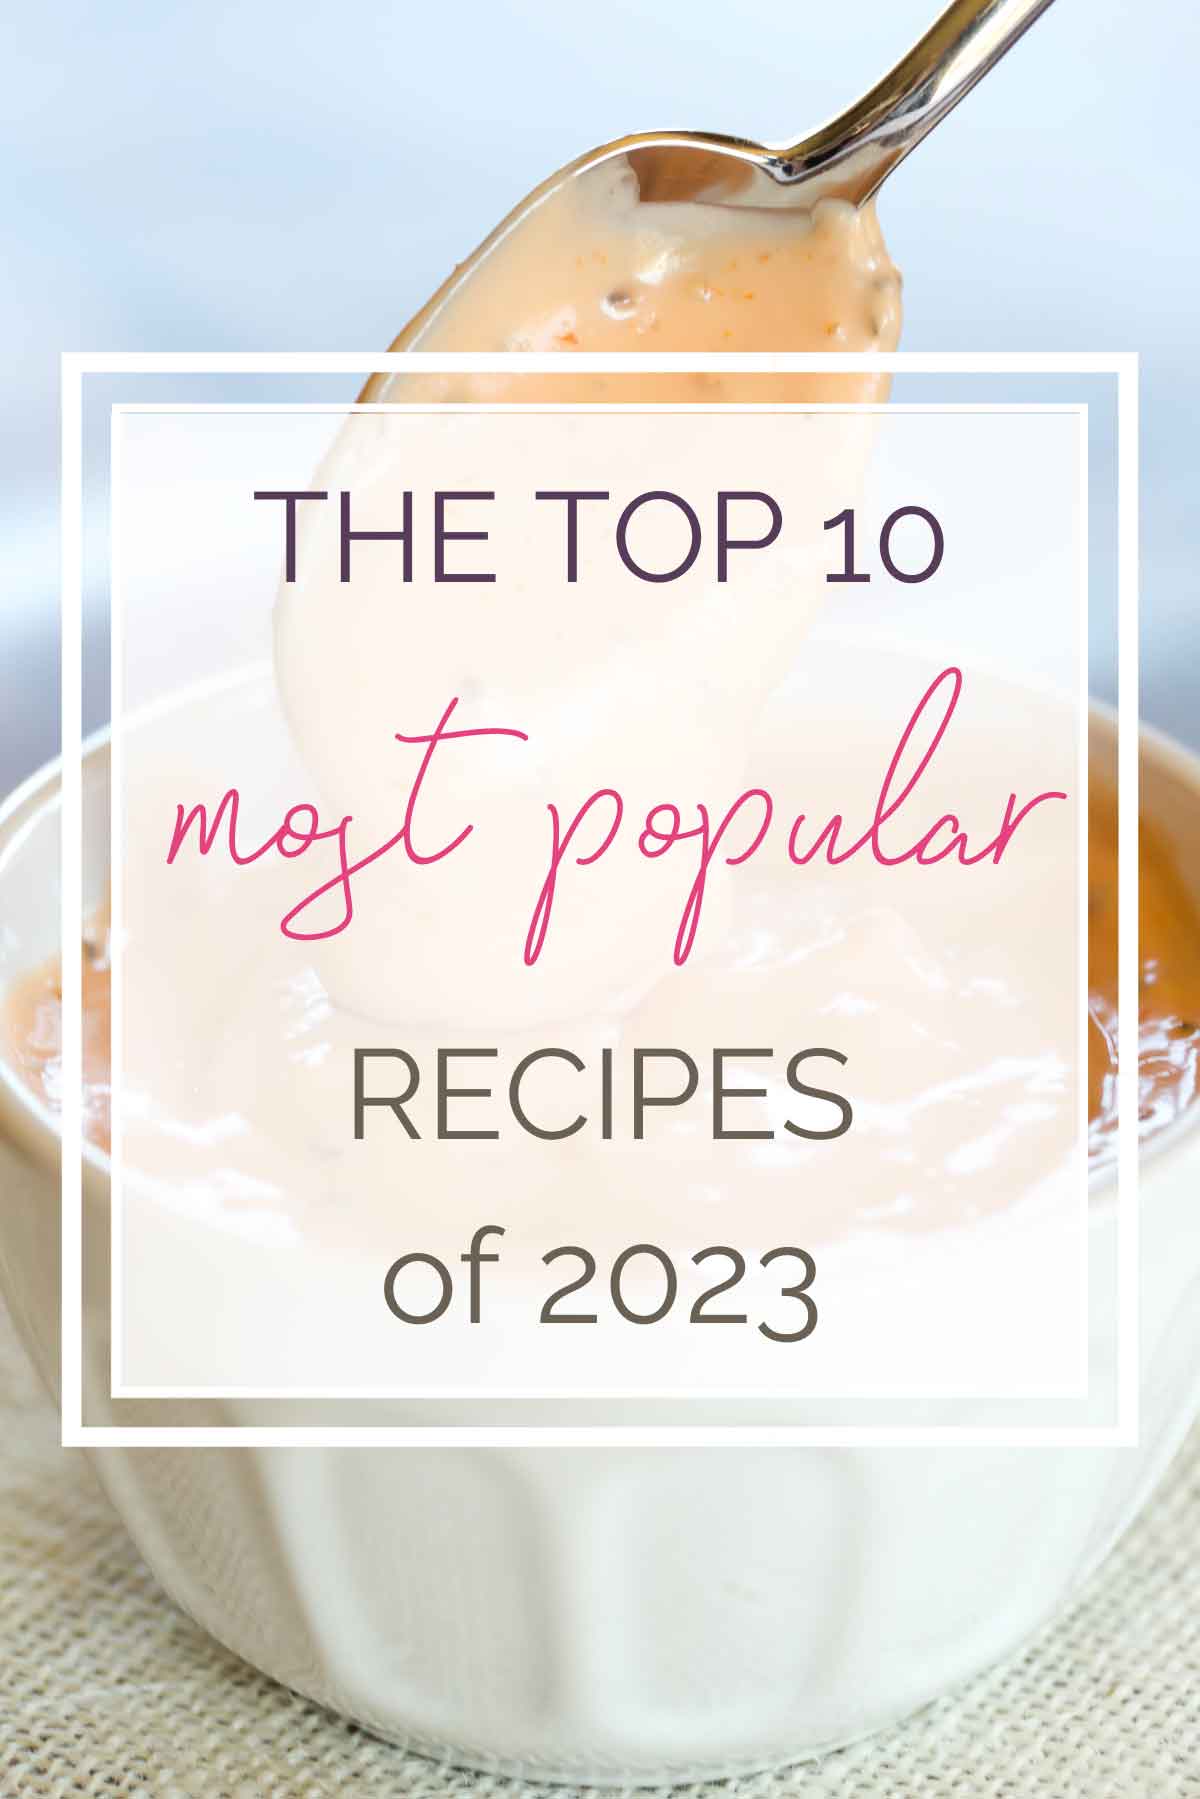 Photo of spoon and bowl of burger sauce with text overlay "The Top 10 Most Popular Recipes of 2023".